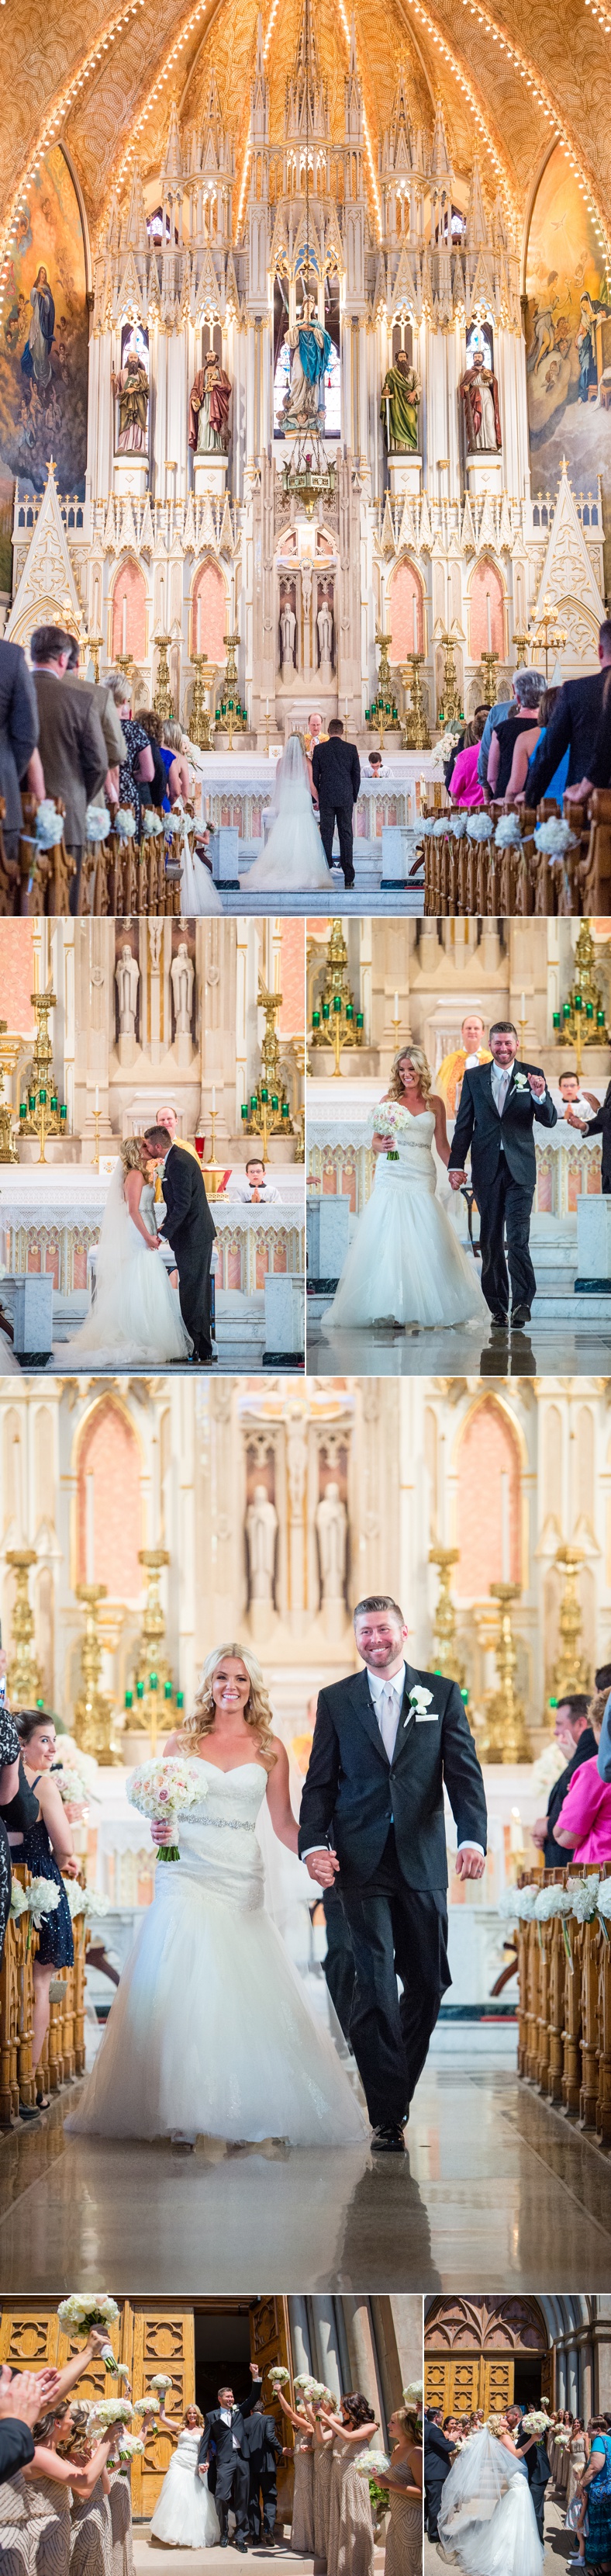 Wedding at Detroit's Sweetest Heart of Mary